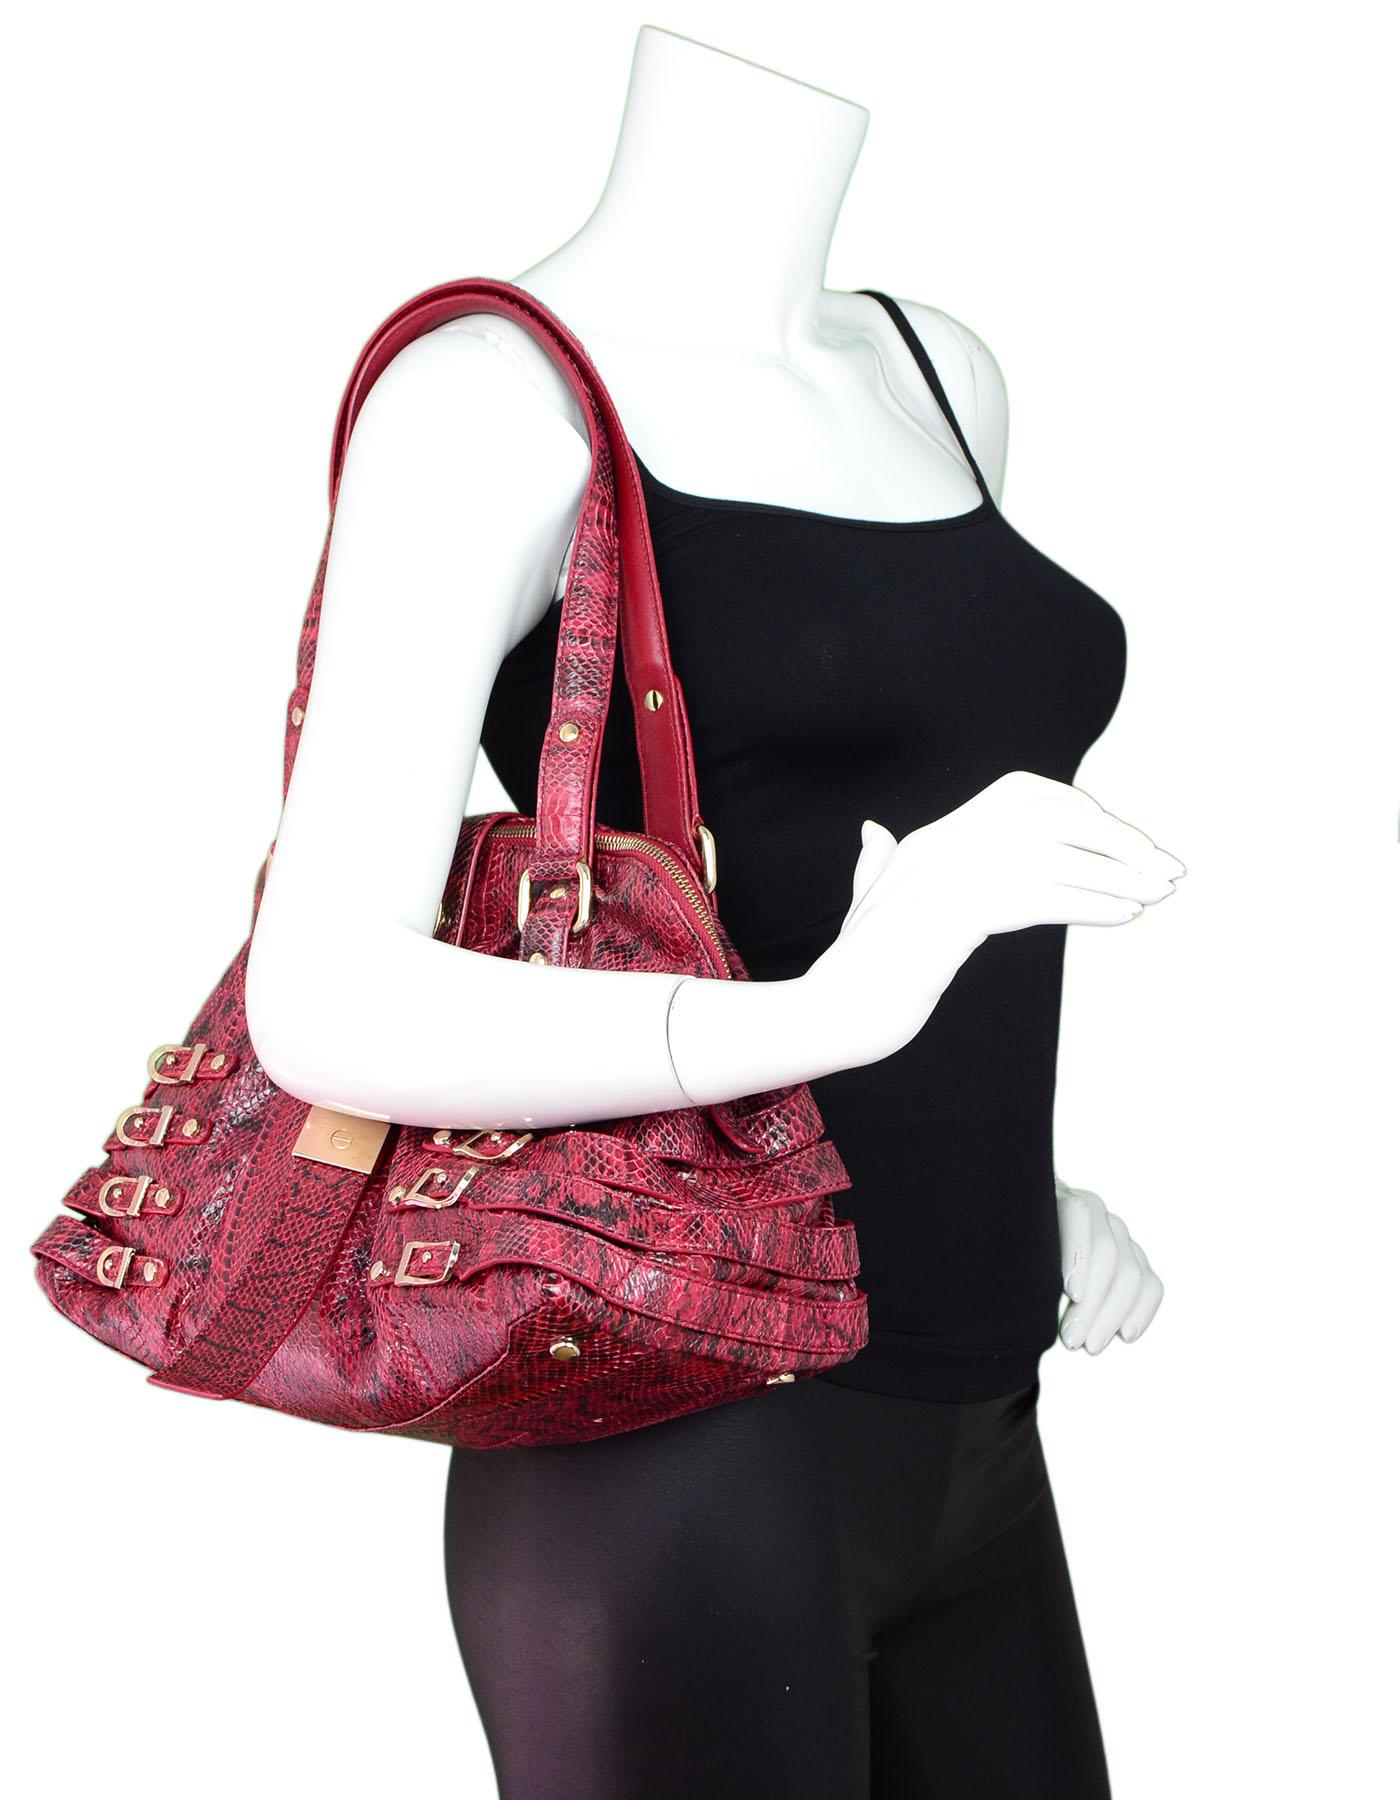 Jimmy Choo Red Snakskin Buckle Bag

Made In: Italy
Color: Red
Hardware: Goldtone
Materials: Snakeskin, metal
Lining: Beige textile
Closure/Opening: Double zip top
Exterior Pockets: None
Interior Pockets: Zip wall pocket, wall pocket
Overall